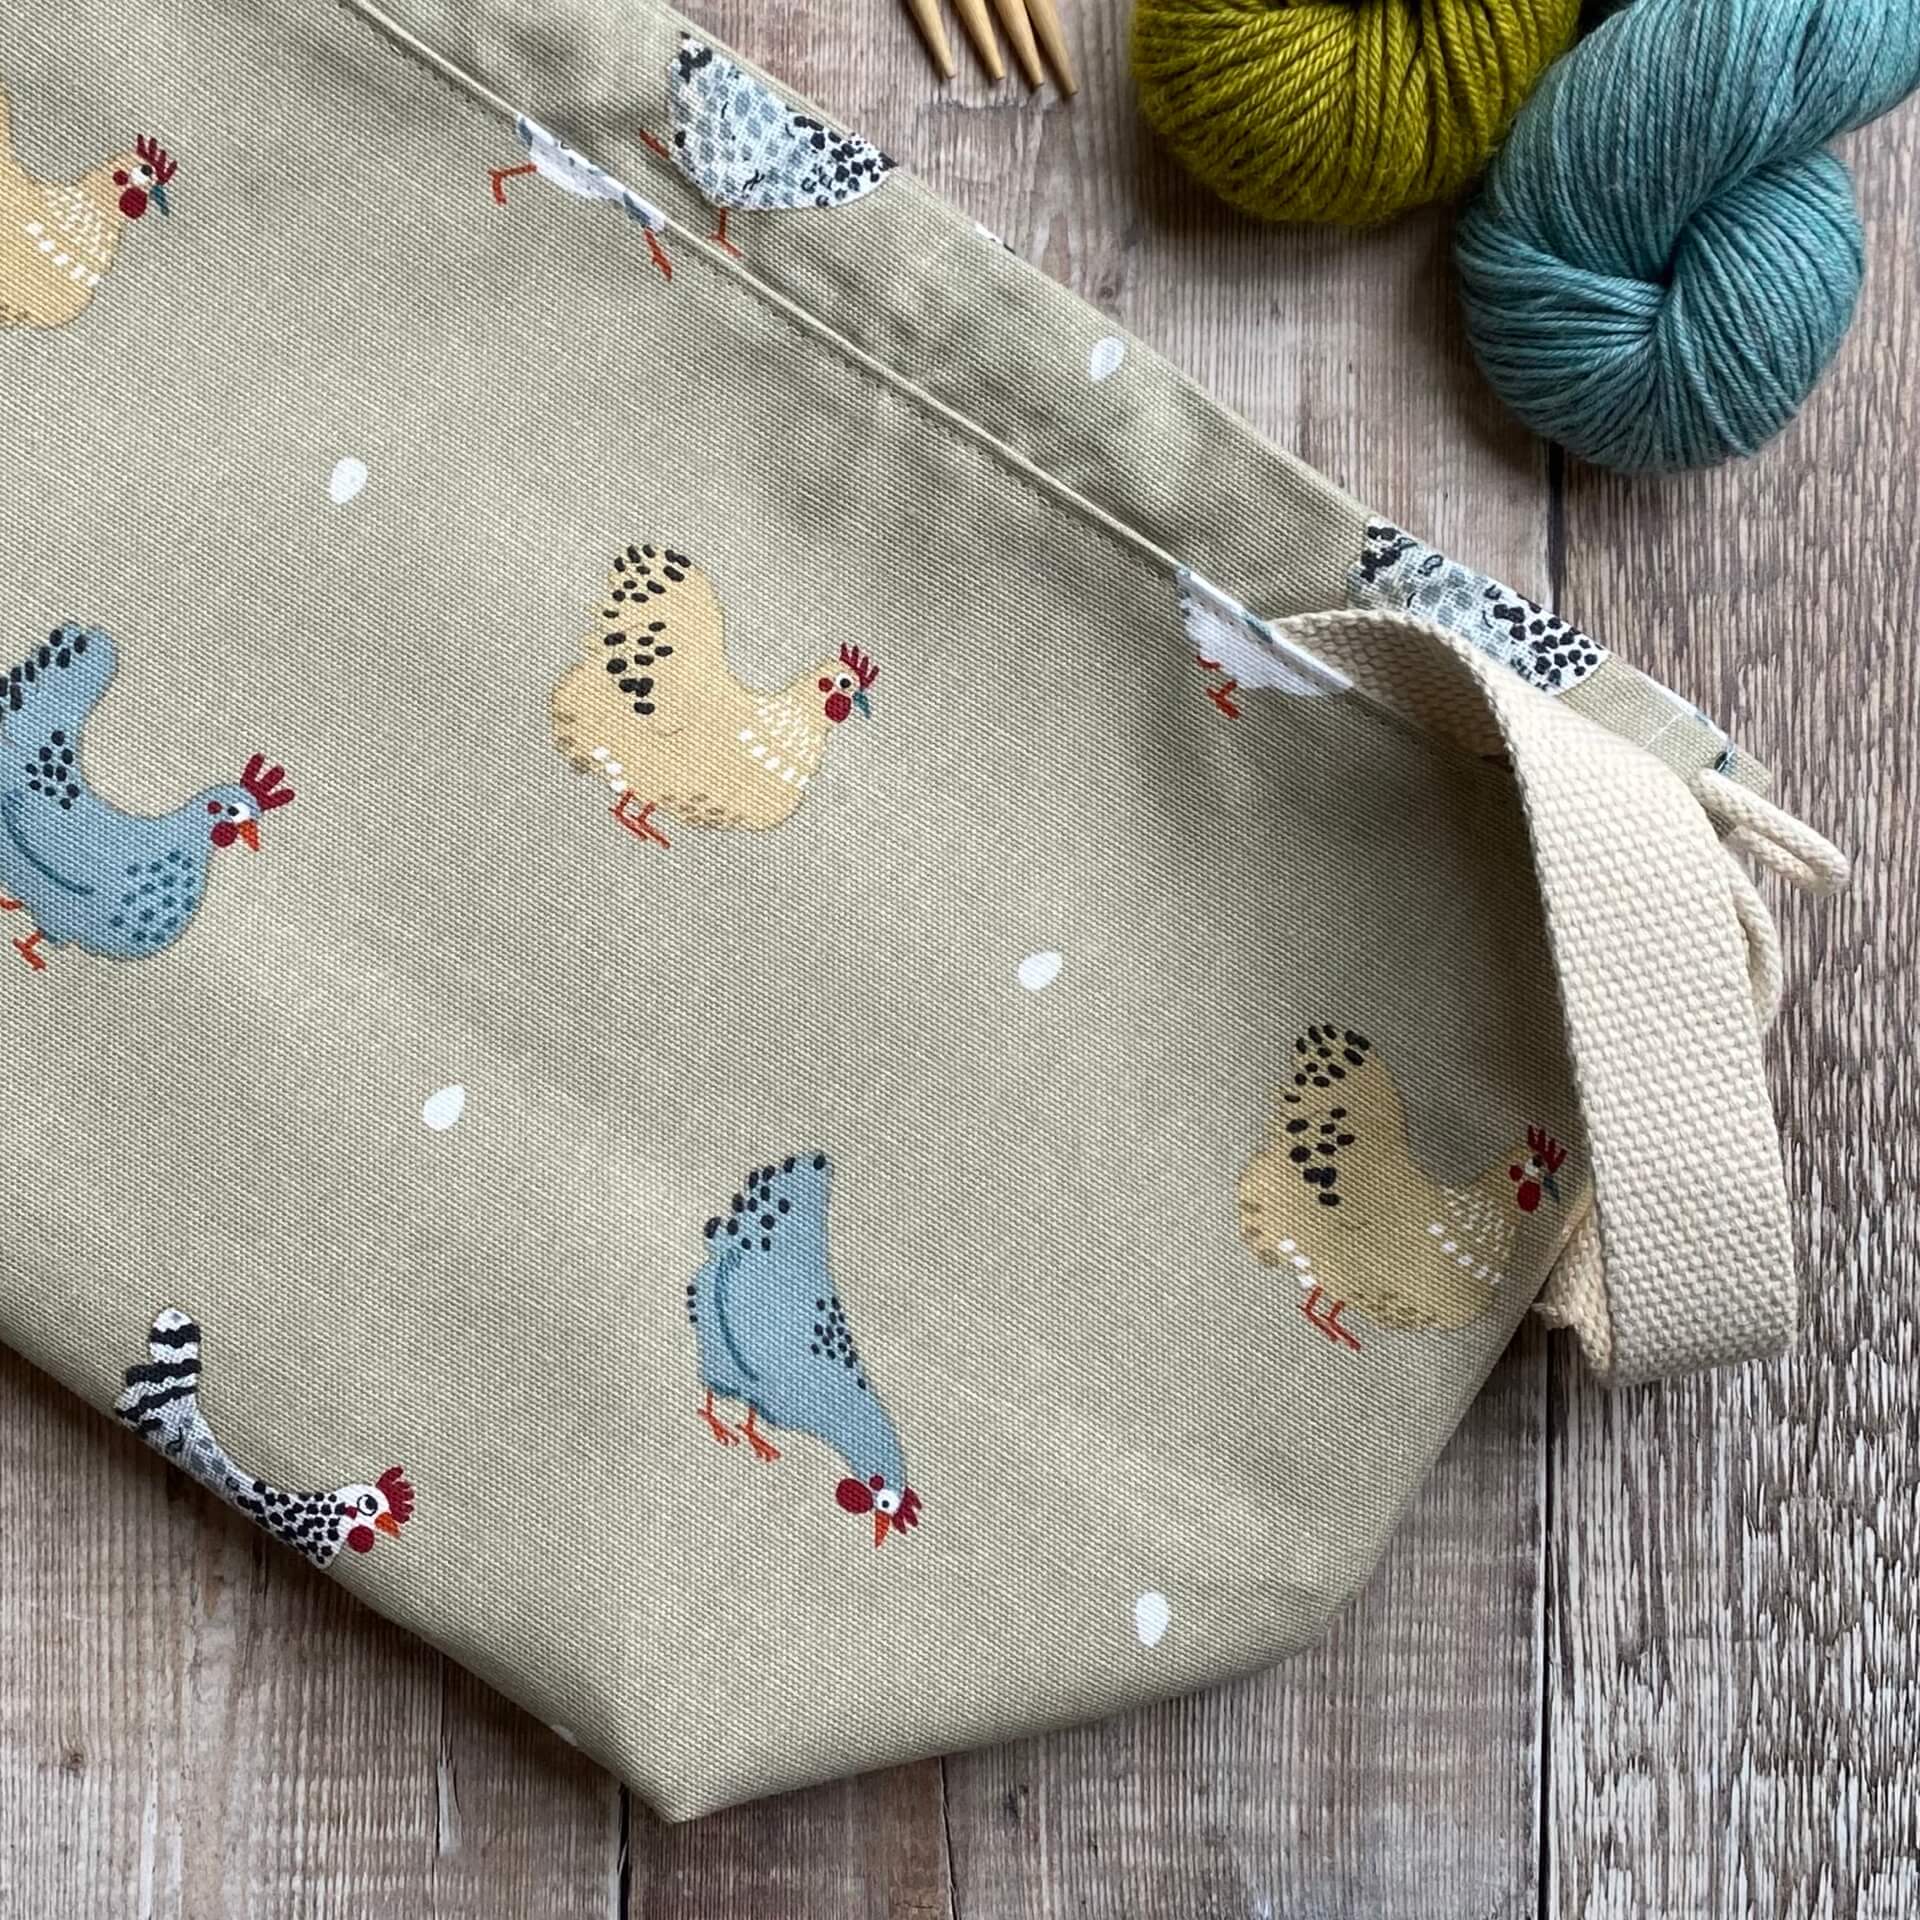 A medium sized knitting project bag lies on a wooden table next to some yarn. It has a sturdy natural coloured handle and images of chickens and their eggs which have been hand drawn. 